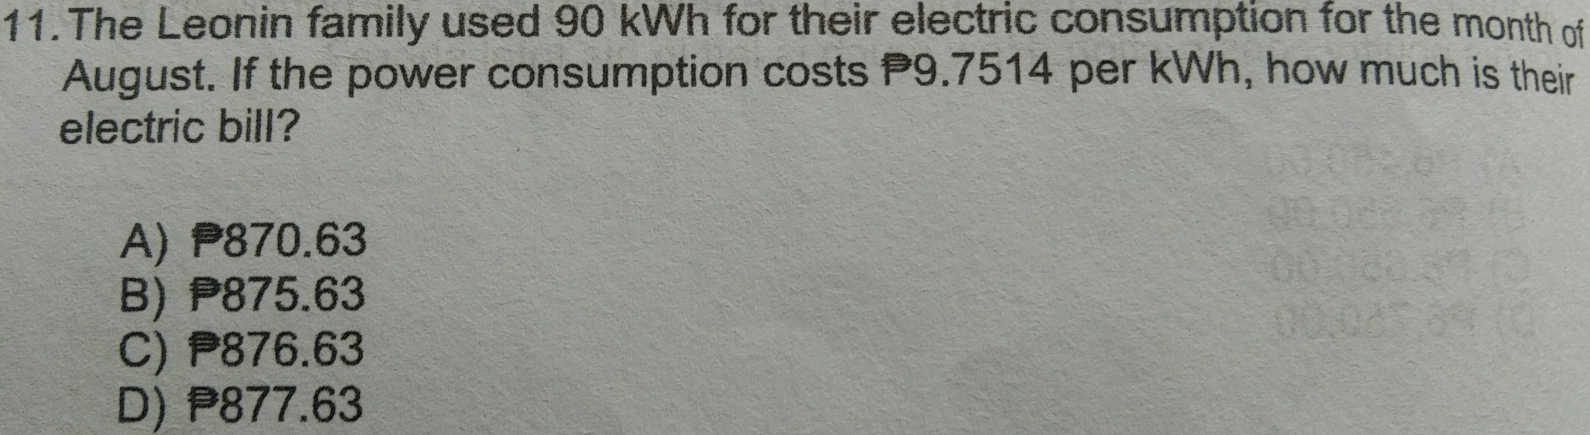 11. The Leonin family used 90 kWh for their electric consumption for the month off August. If the power consumption costs P9.7514 per kWh, how much is their electric bill? A P870.63 B P875.63 C P876.63 D P877.63